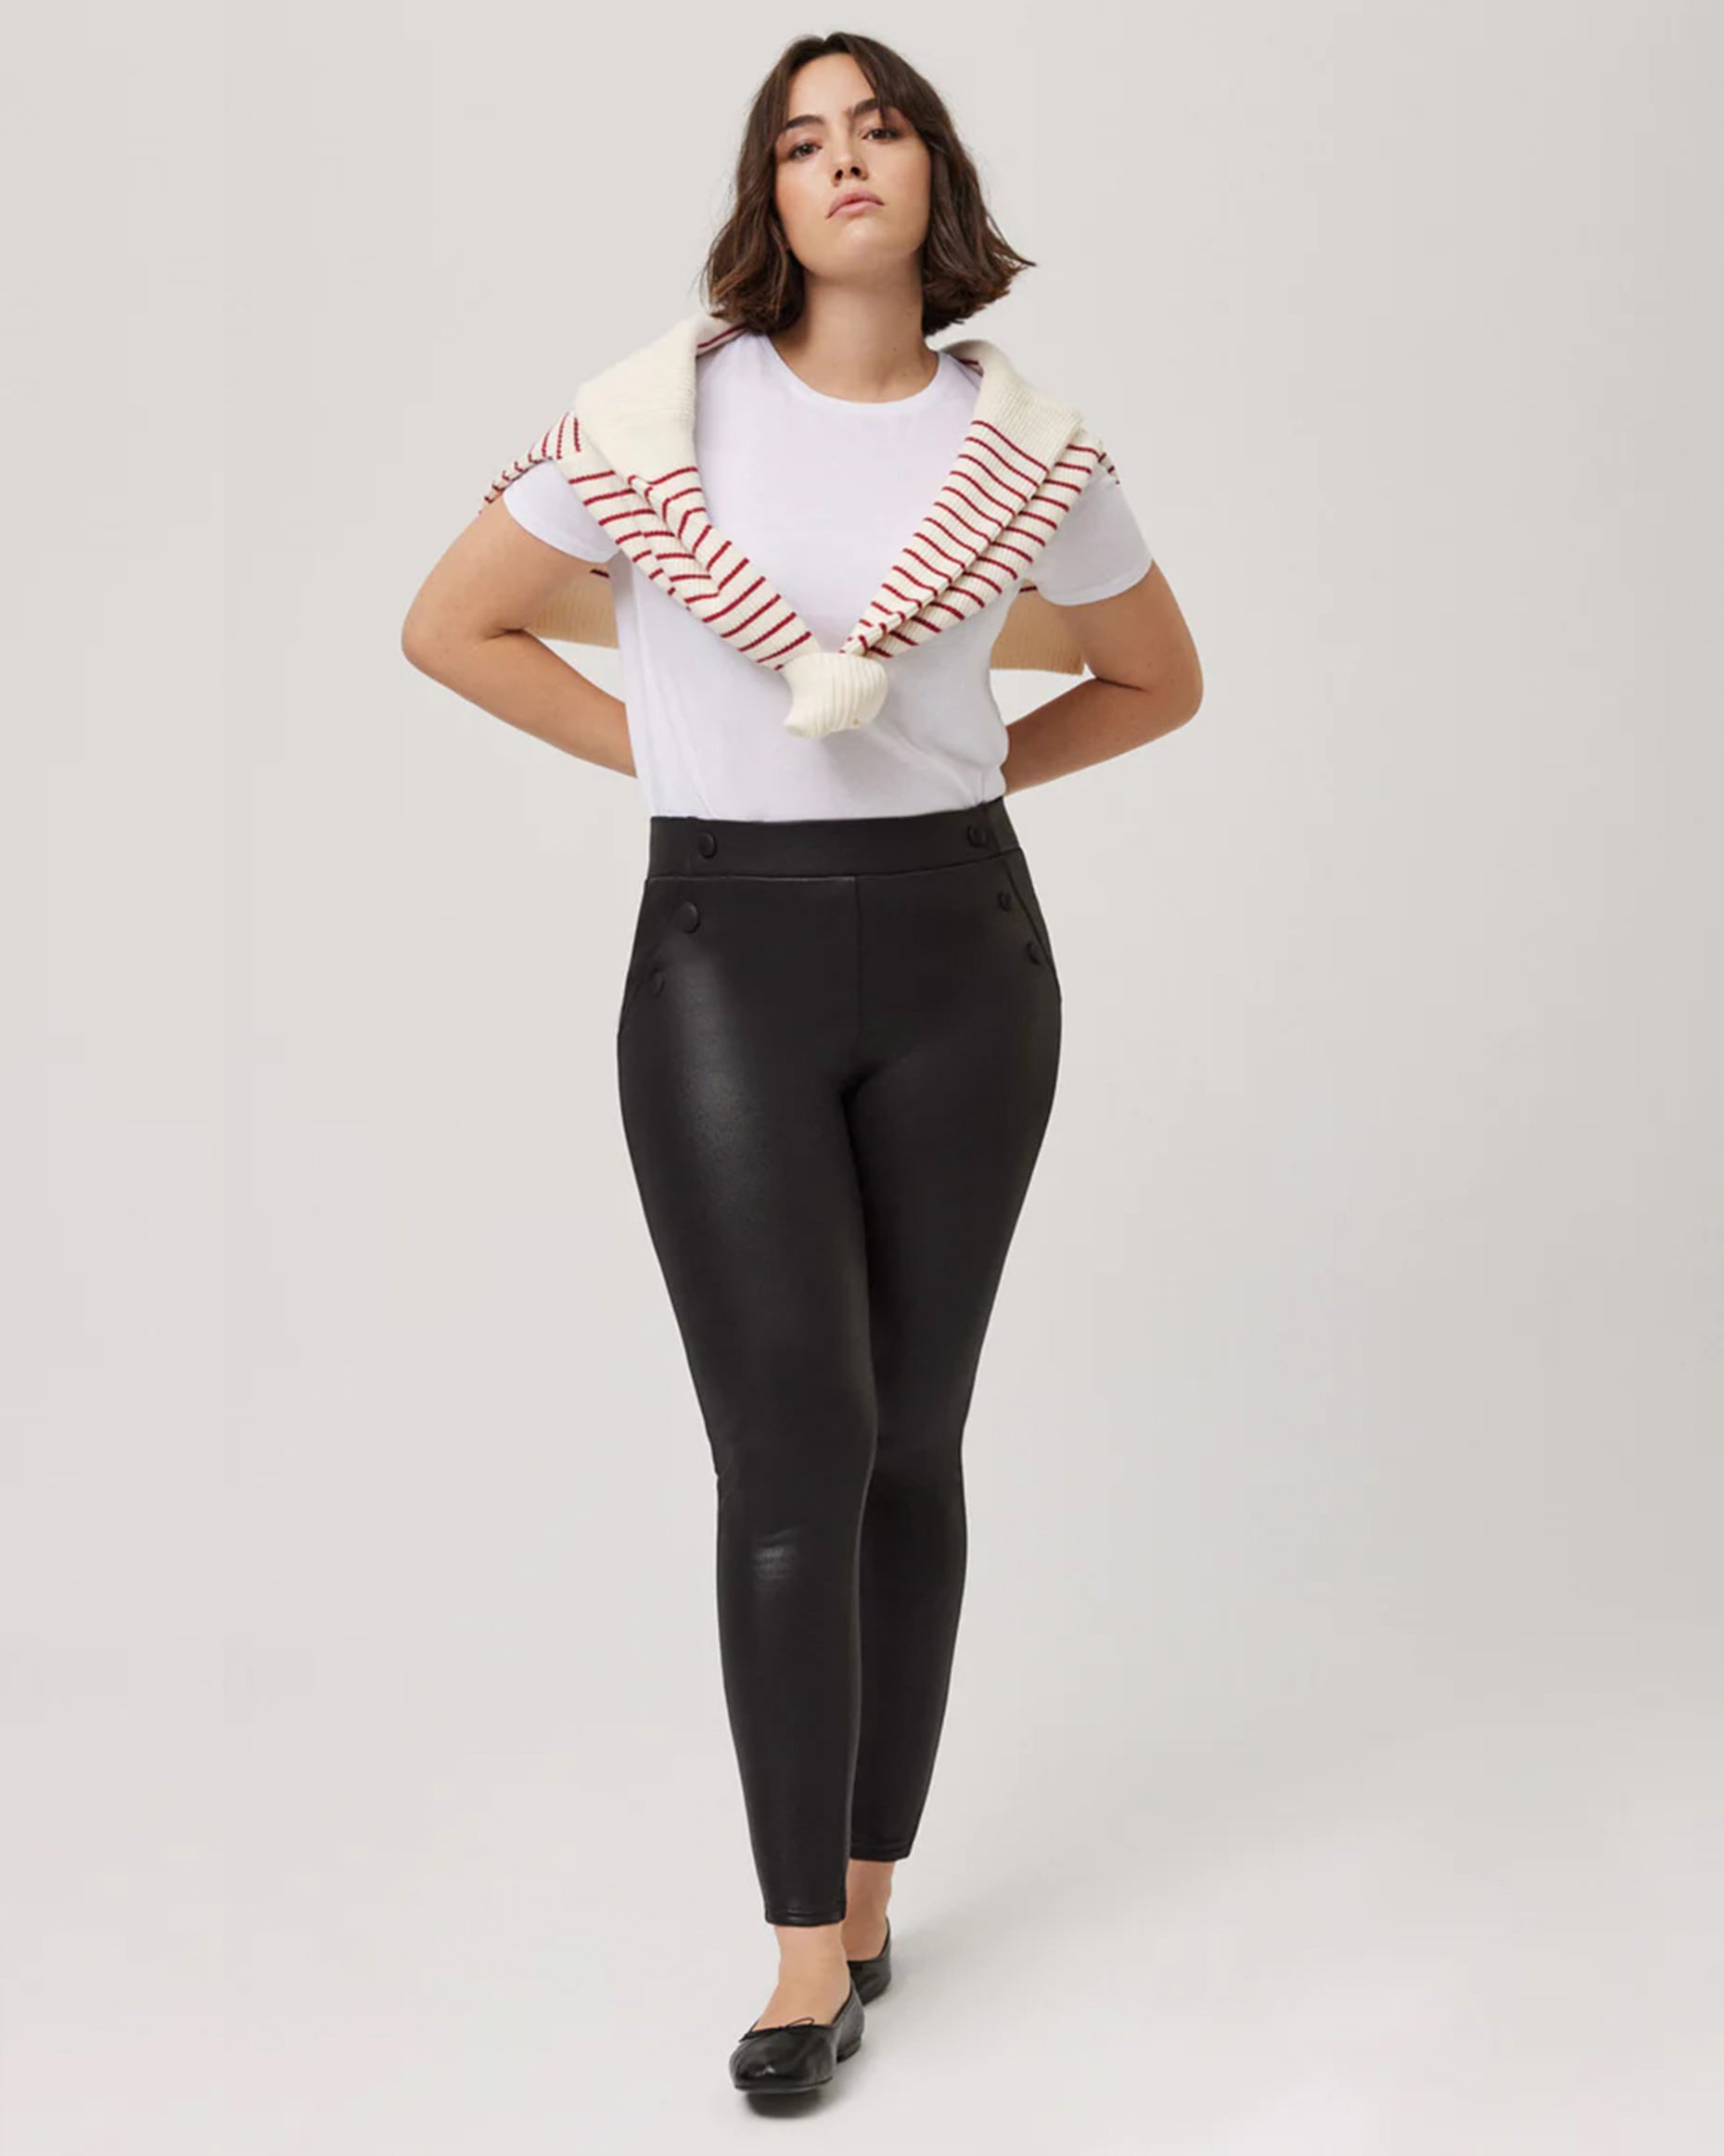 Ysabel Mora 70166 Waxed Thermal Leggings - High rise black trouser leggings with waxed effect finish, warm fleece lining, faux front pockets with covered buttons and deep elasticated waistband. Worn with a striped sweater and white t-shirt